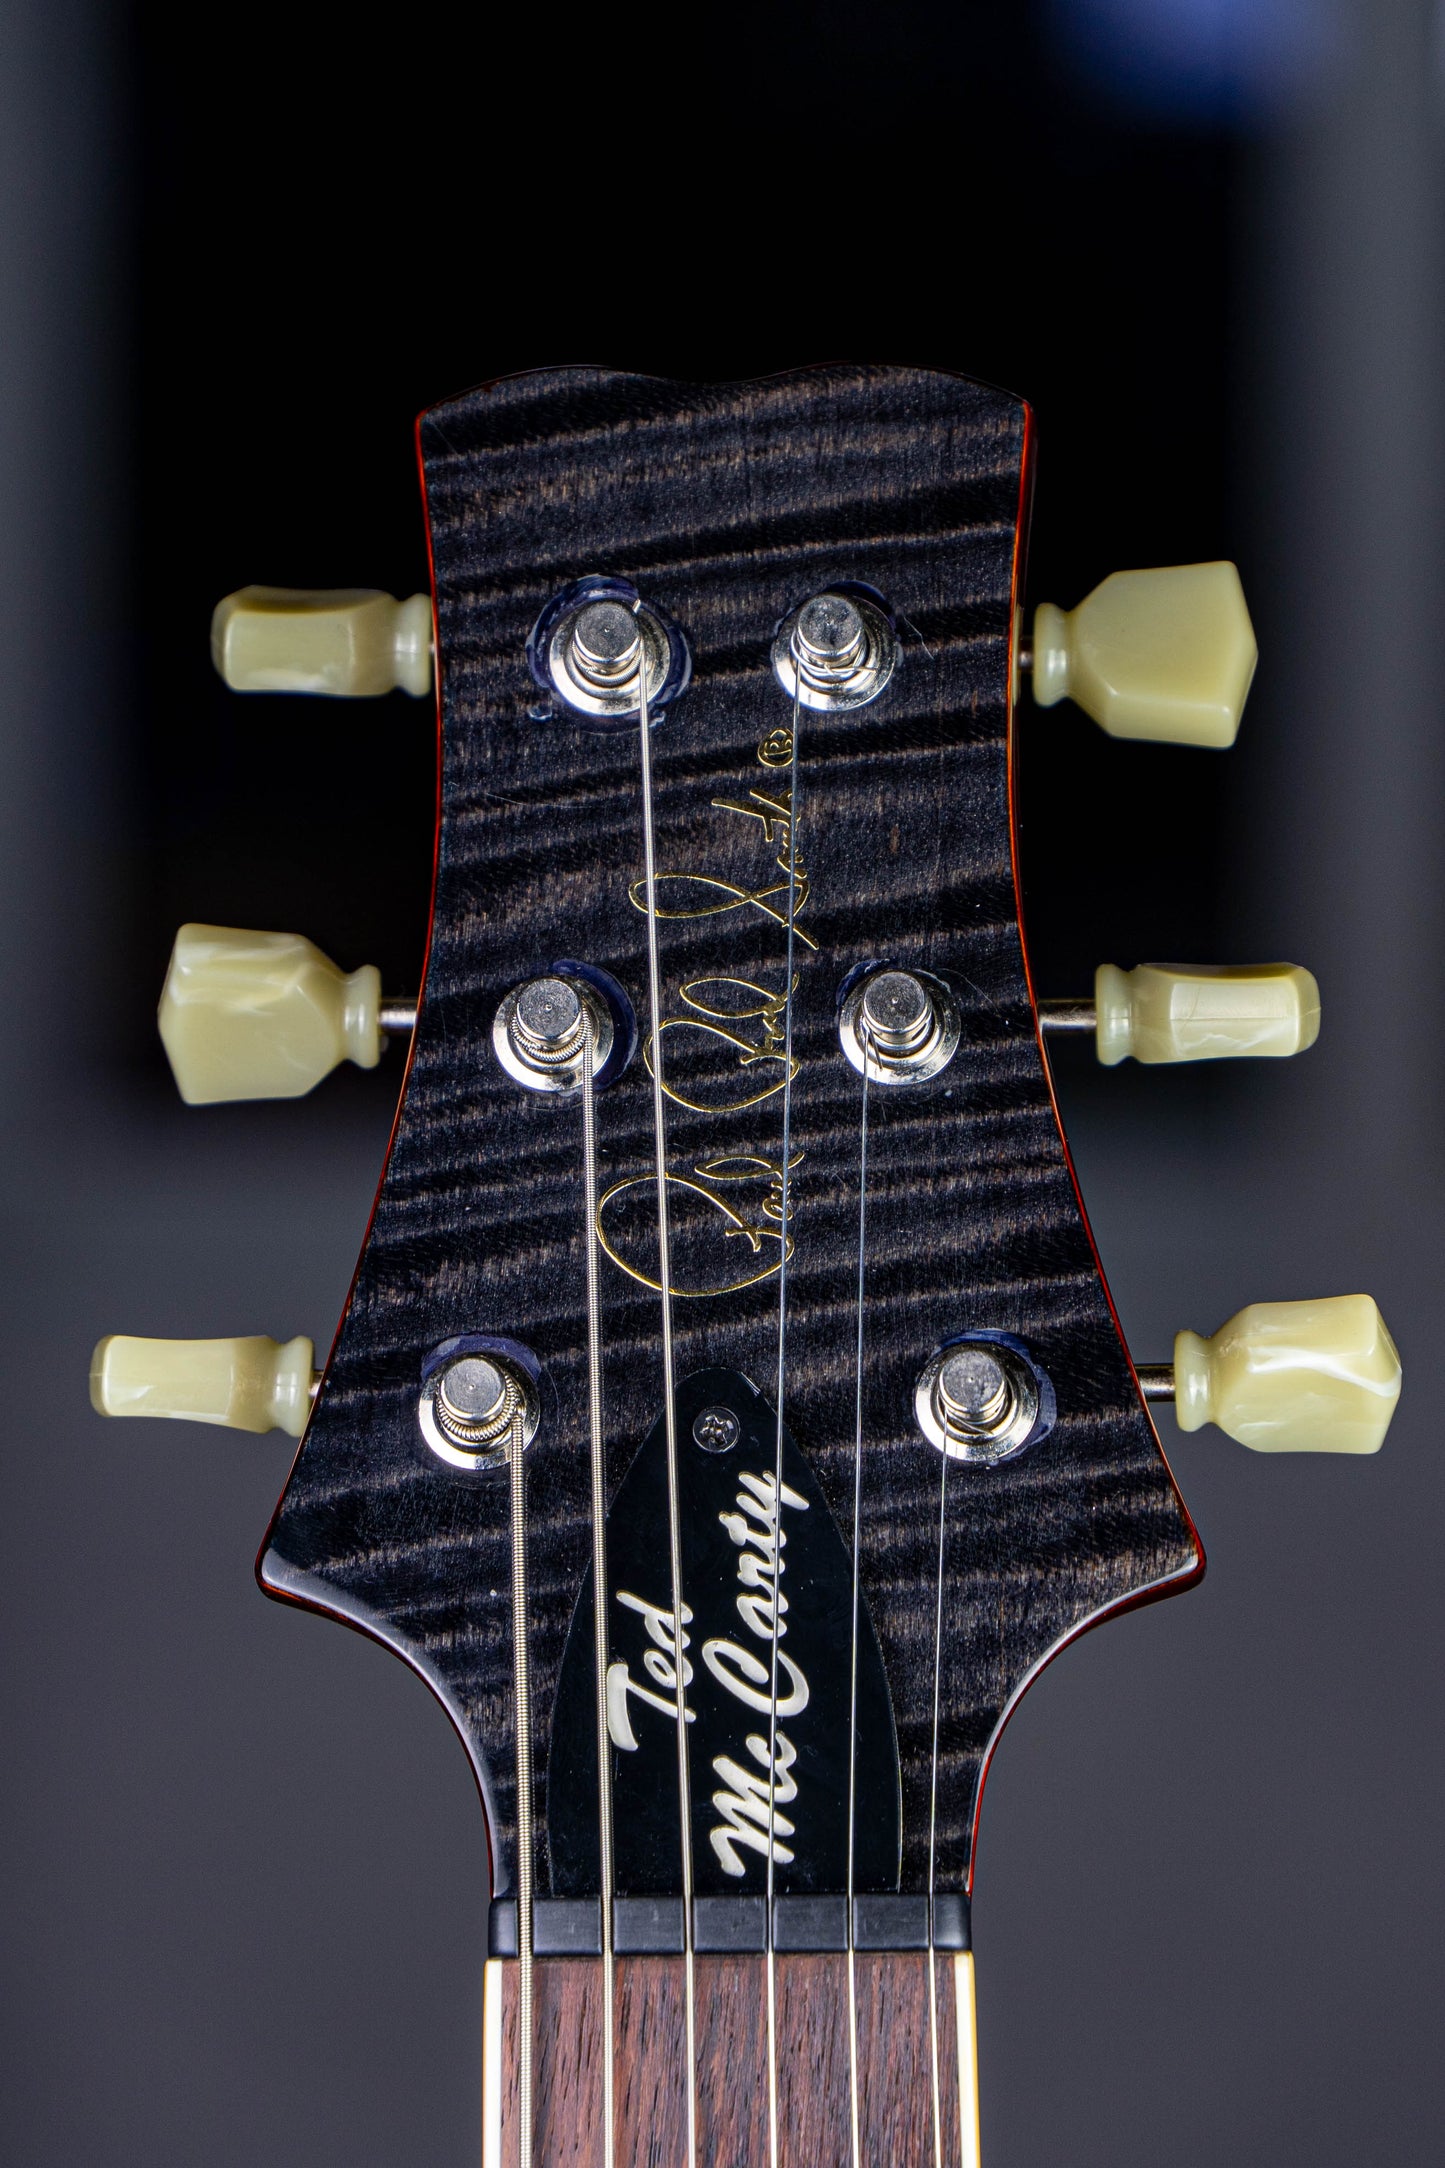 PRS Ted McCarty SC245 10-top McCarty Sunburst 2009